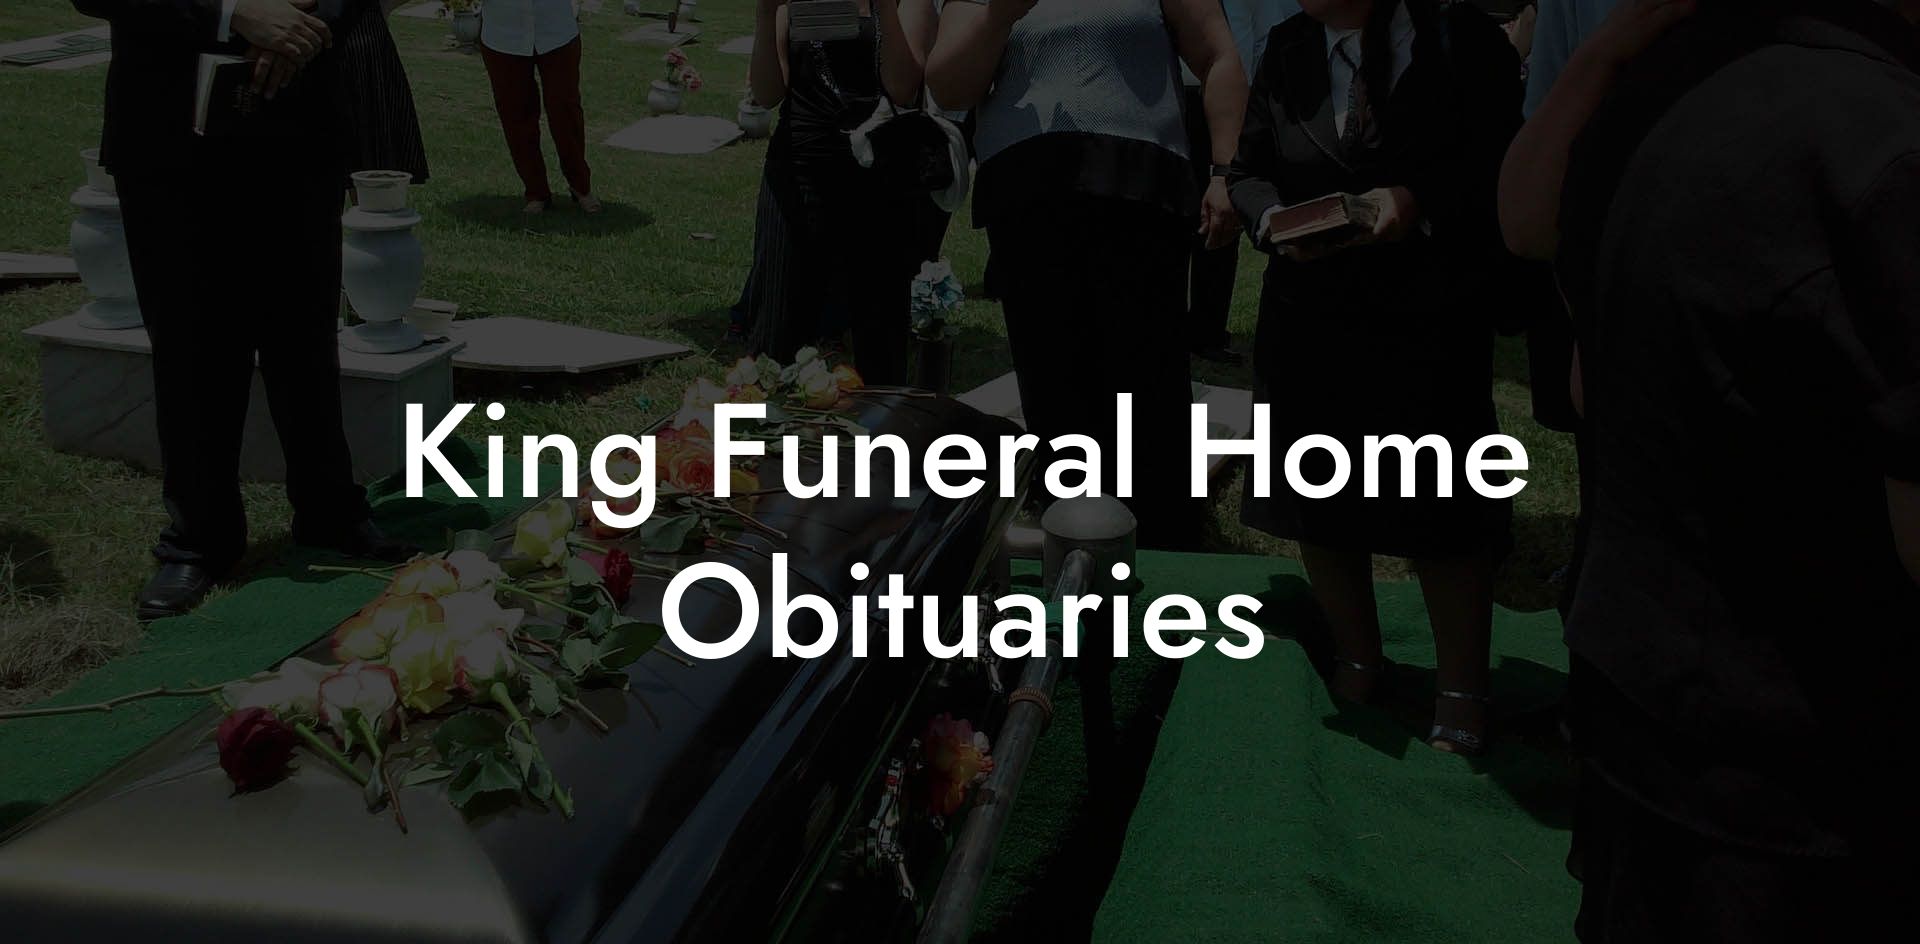 King Funeral Home Obituaries